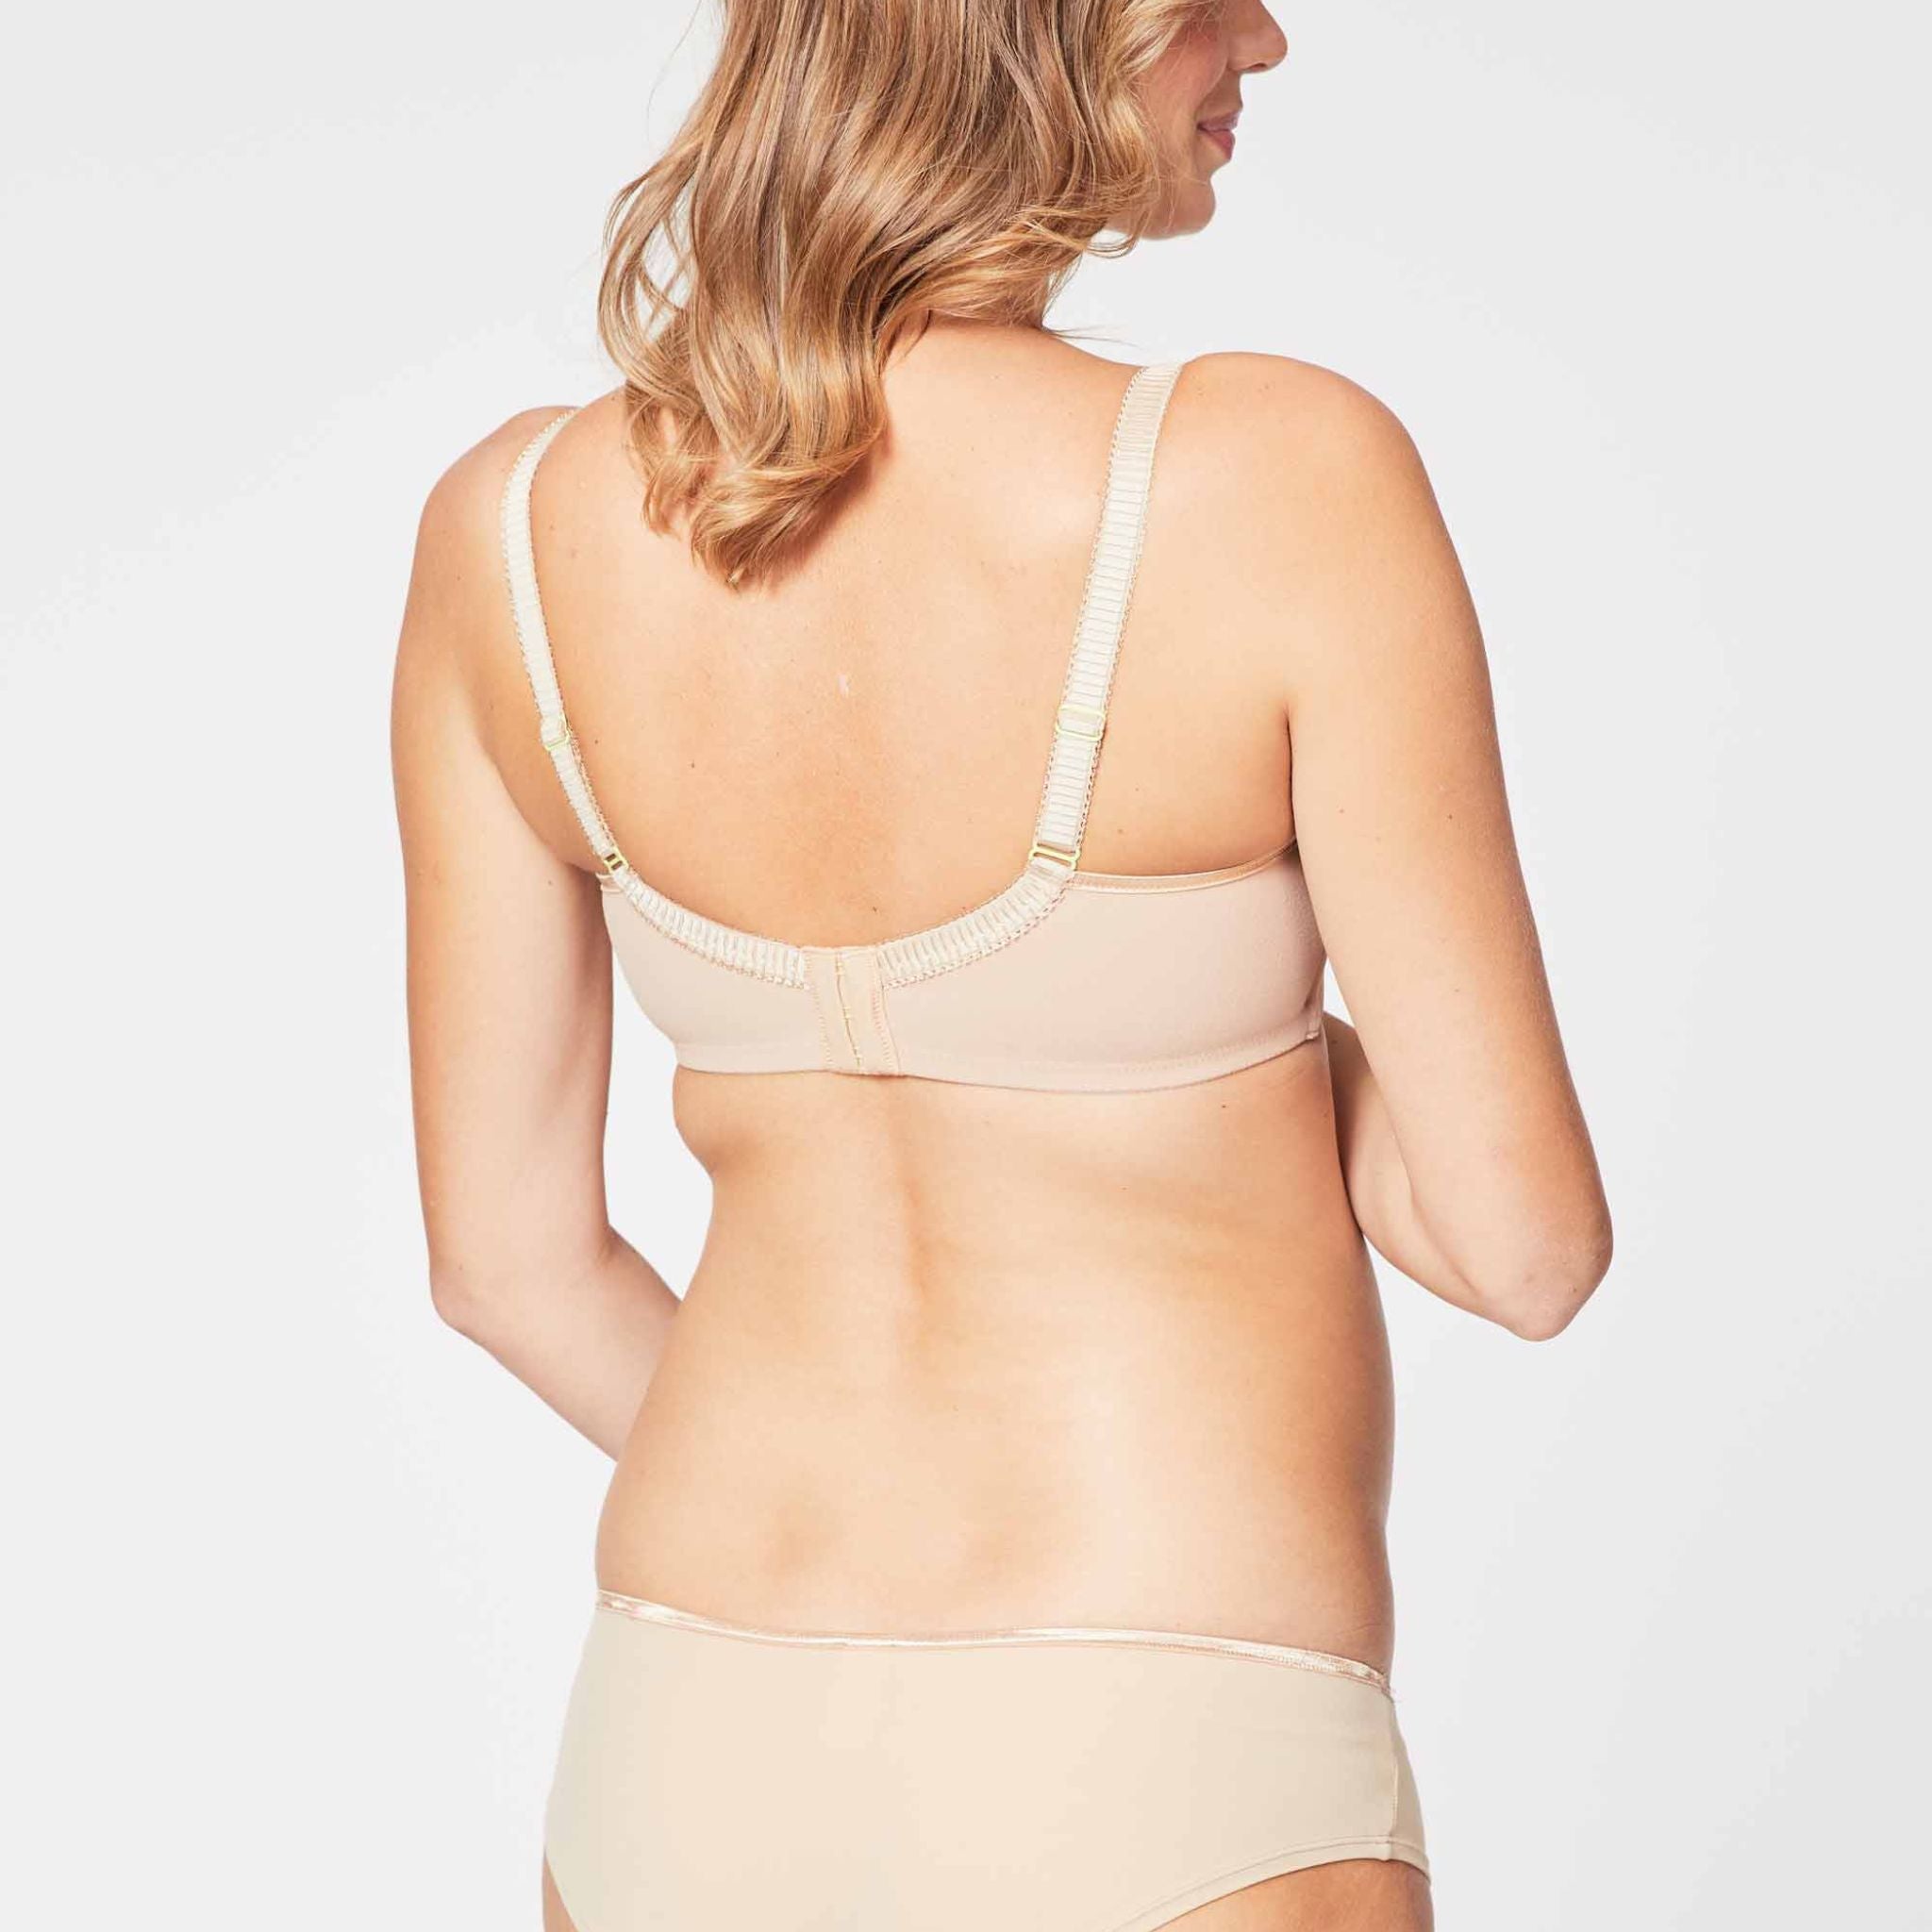 The perfect everyday bra, with flavour! It’s hard to go past this this lightly contoured spacer bra, with flexible wire that provides the wearer with versatility, a smooth profile, great shape, comfort and superior sup- port without the bulkiness of foam. The perfect t-shirt bra, with a few tantalising feature details that will be sure to surprise!